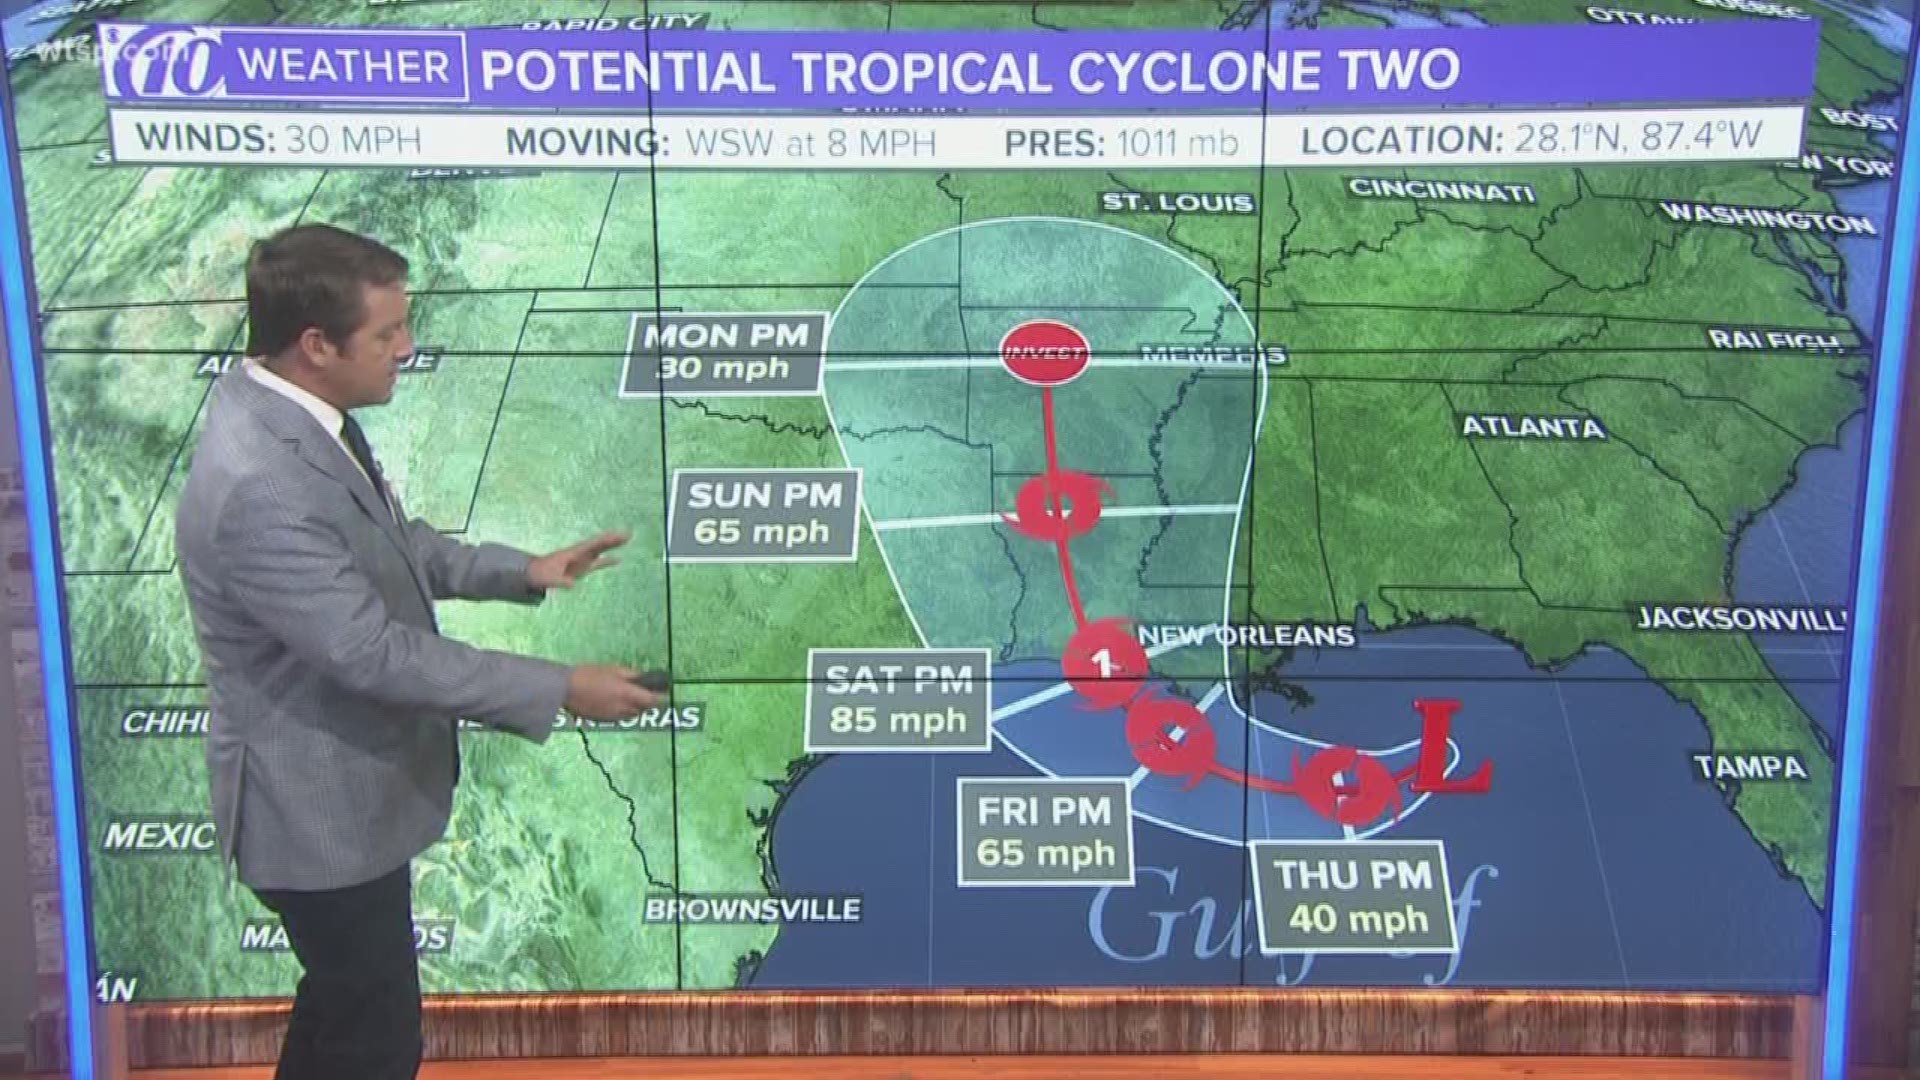 A tropical cyclone is expected to form Thursday over the northern Gulf of Mexico: Hurricane, tropical storm and storm surge watches are already being issued ahead of anticipated heavy rainfall.

As of 5 p.m. ET Wednesday, the weather system was located about 125 miles east-southeast of the mouth of the Mississippi River. Maximum sustained winds are being clocked at 30 mph.